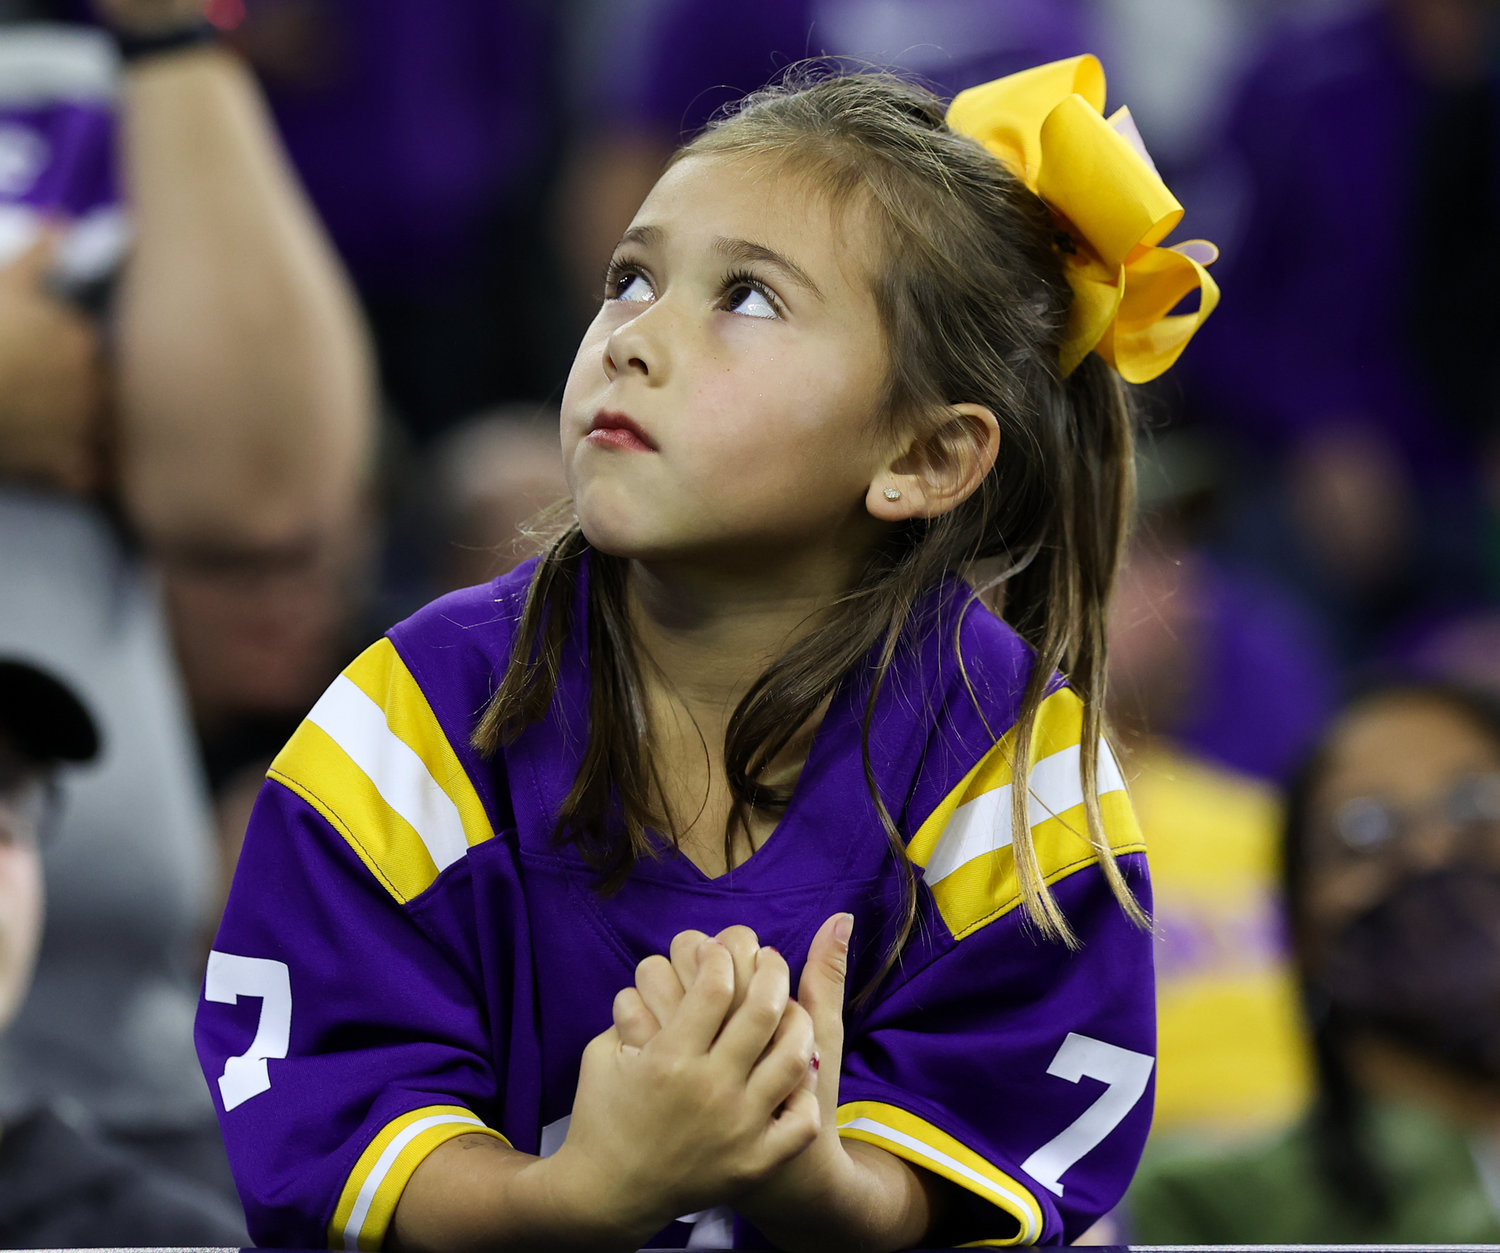 A.young LSU Tigers fan looks up at the scoreboard as Kansas State takes a 14-0 lead in the TaxAct Texas Bowl on Jan. 4, 2022 in Houston, Texas.